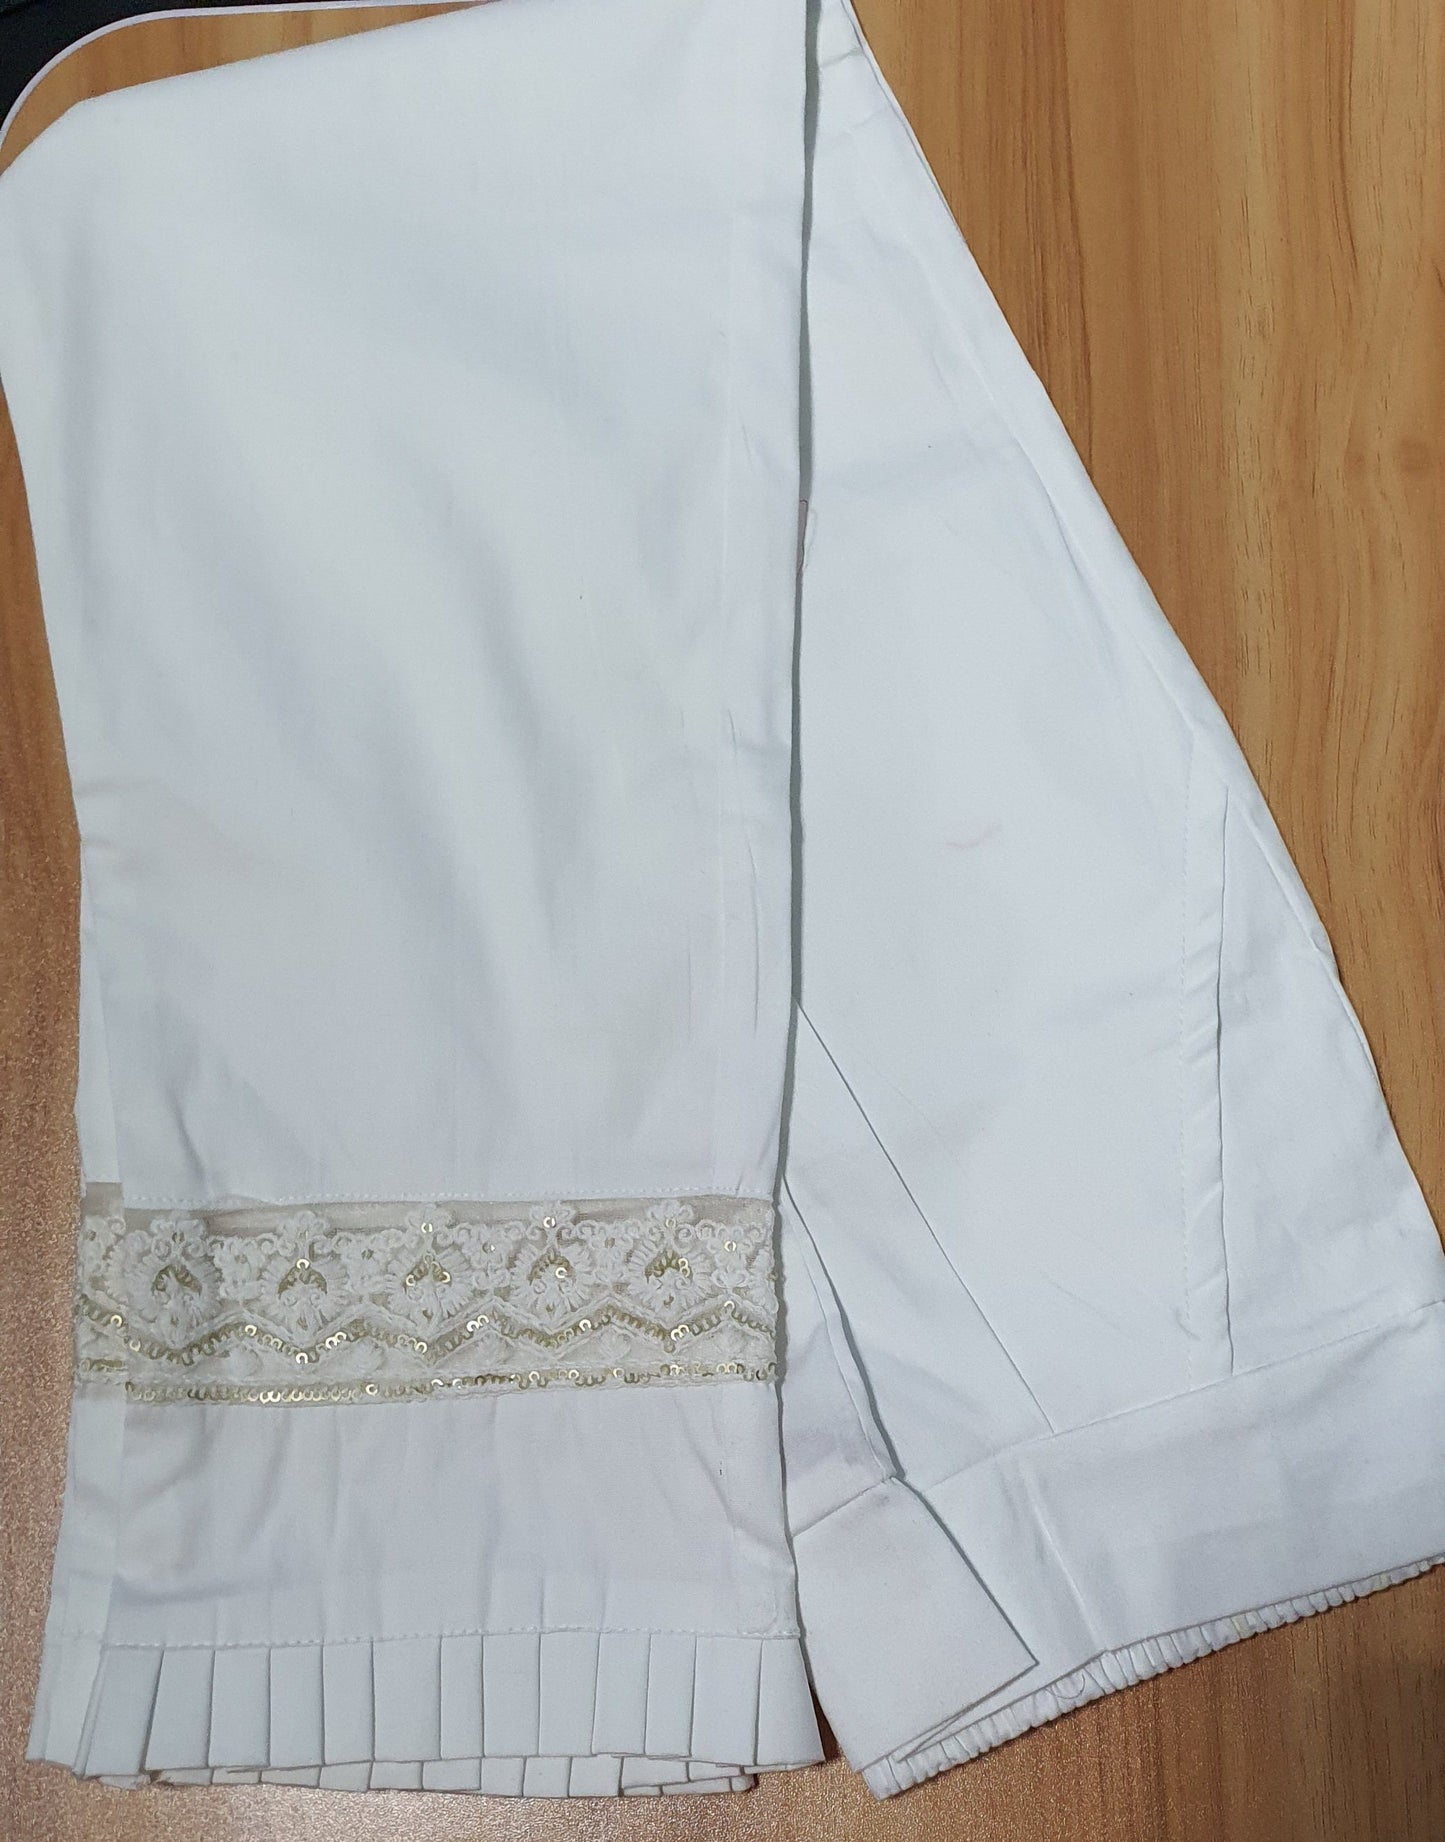 Designer Lace Embroidered Cotton Lycra Pants in 5 colors Cotton Lycra Pants Shopindiapparels.com White 